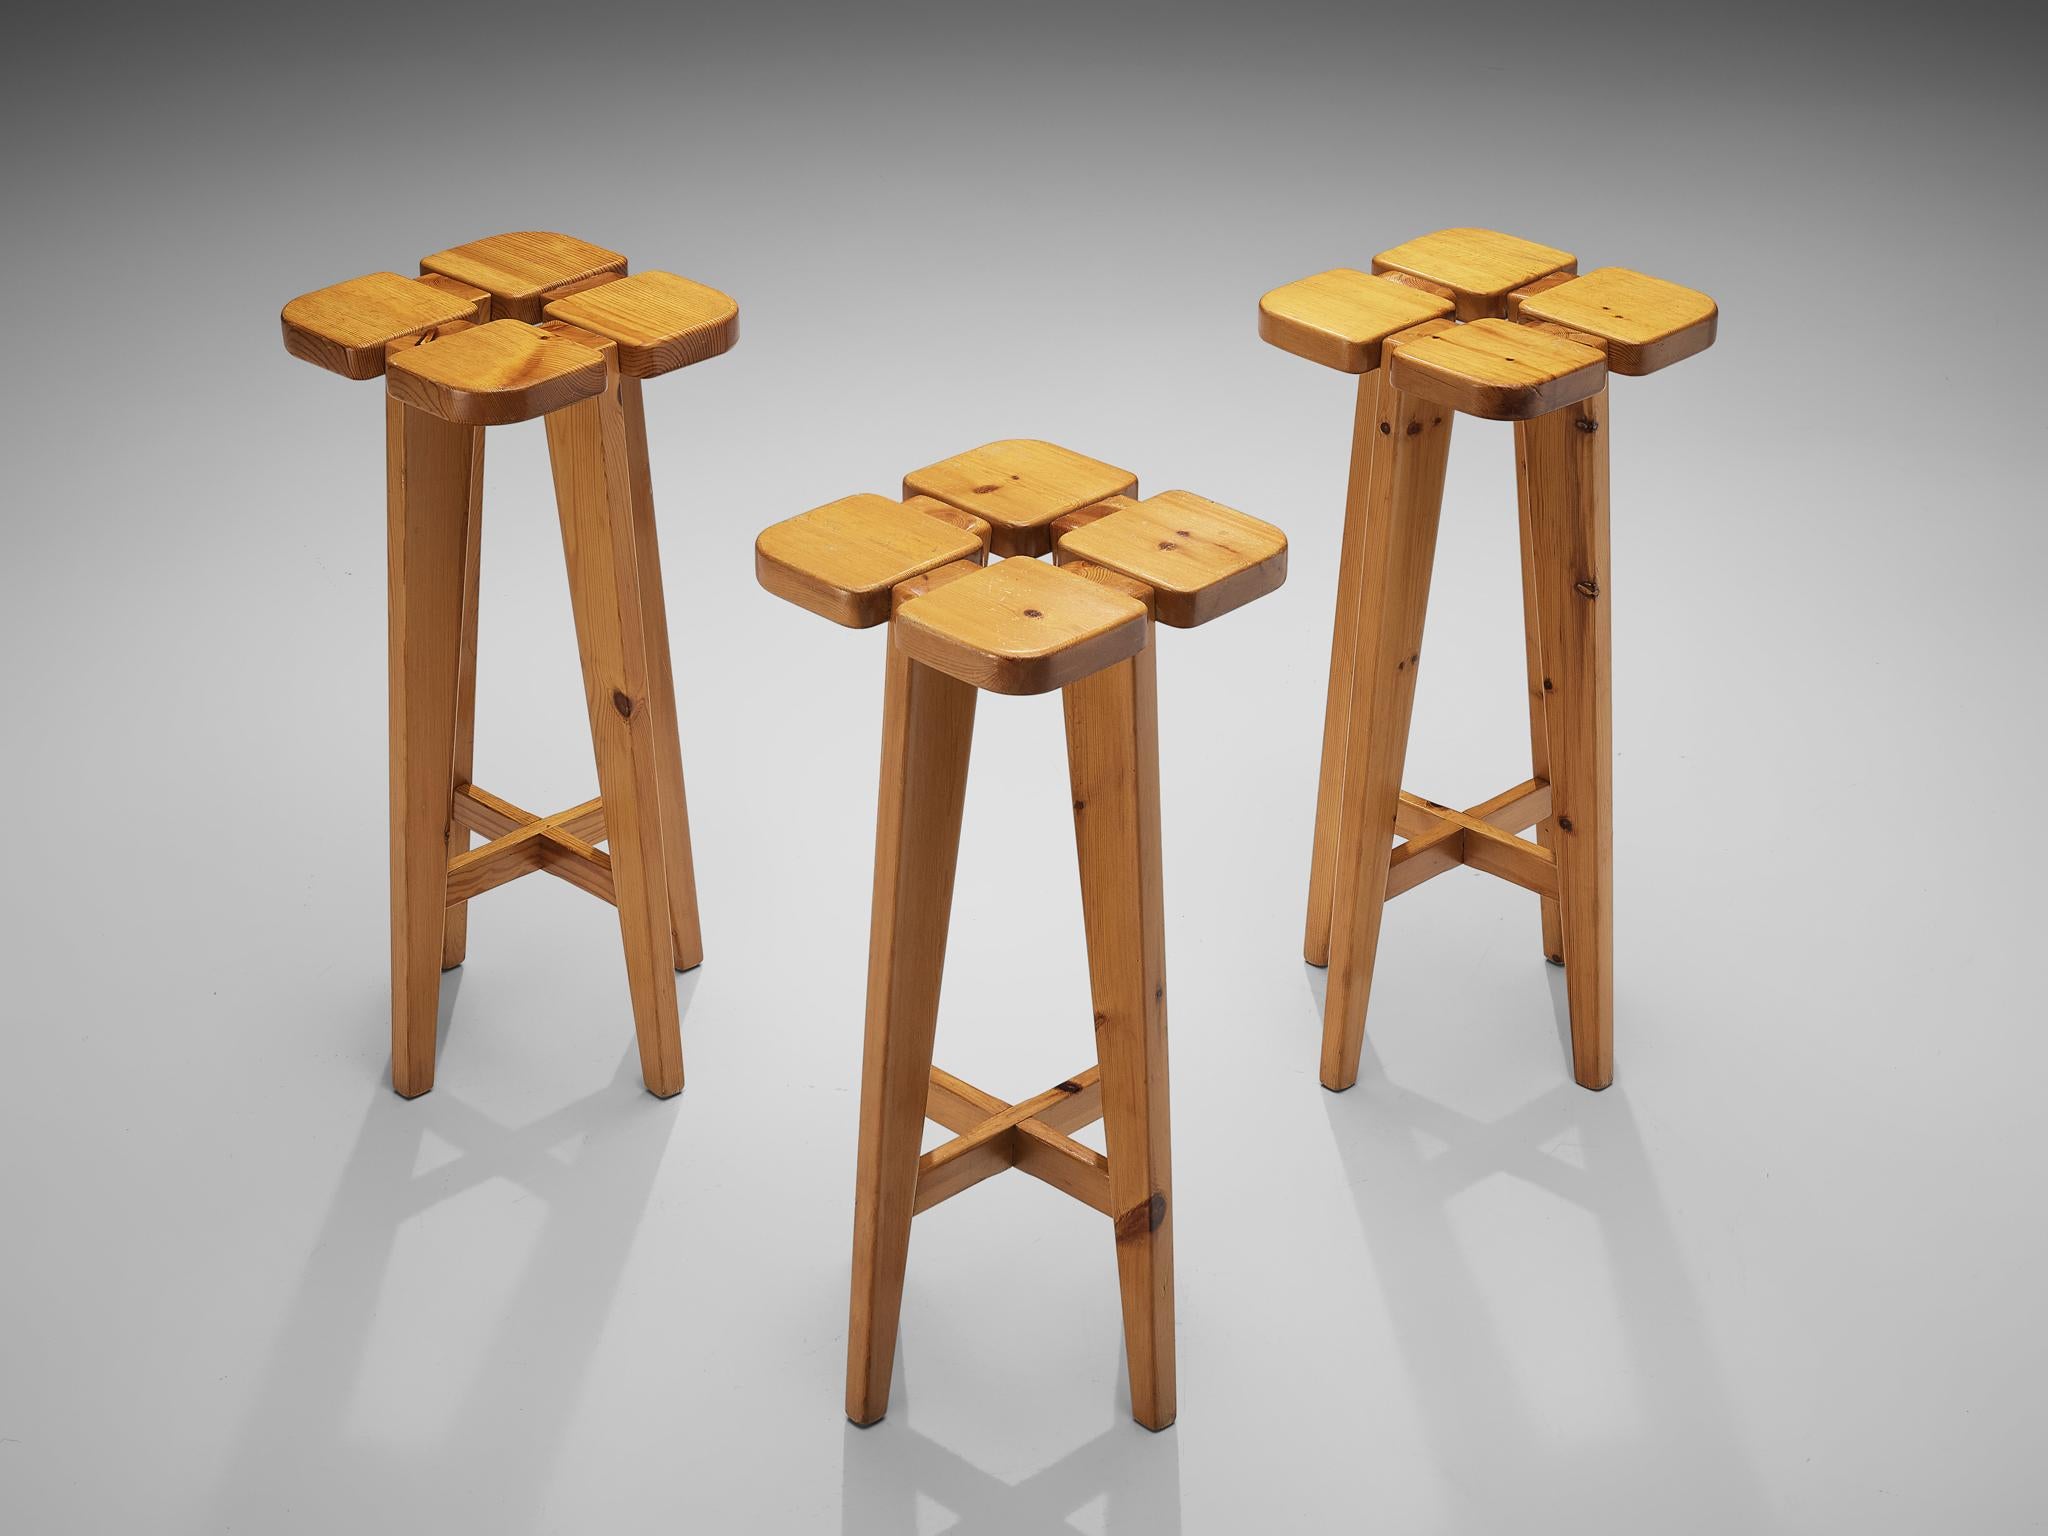 Lisa Johansson-Pape for Stockmann AB, bar stools, solid pine, Finland, 1960s

Scandinavian Modern barstools designed by Lisa Johansson-Pape. The design is simplistic: A clover top with four sloping legs. The construction of the stools is nicely